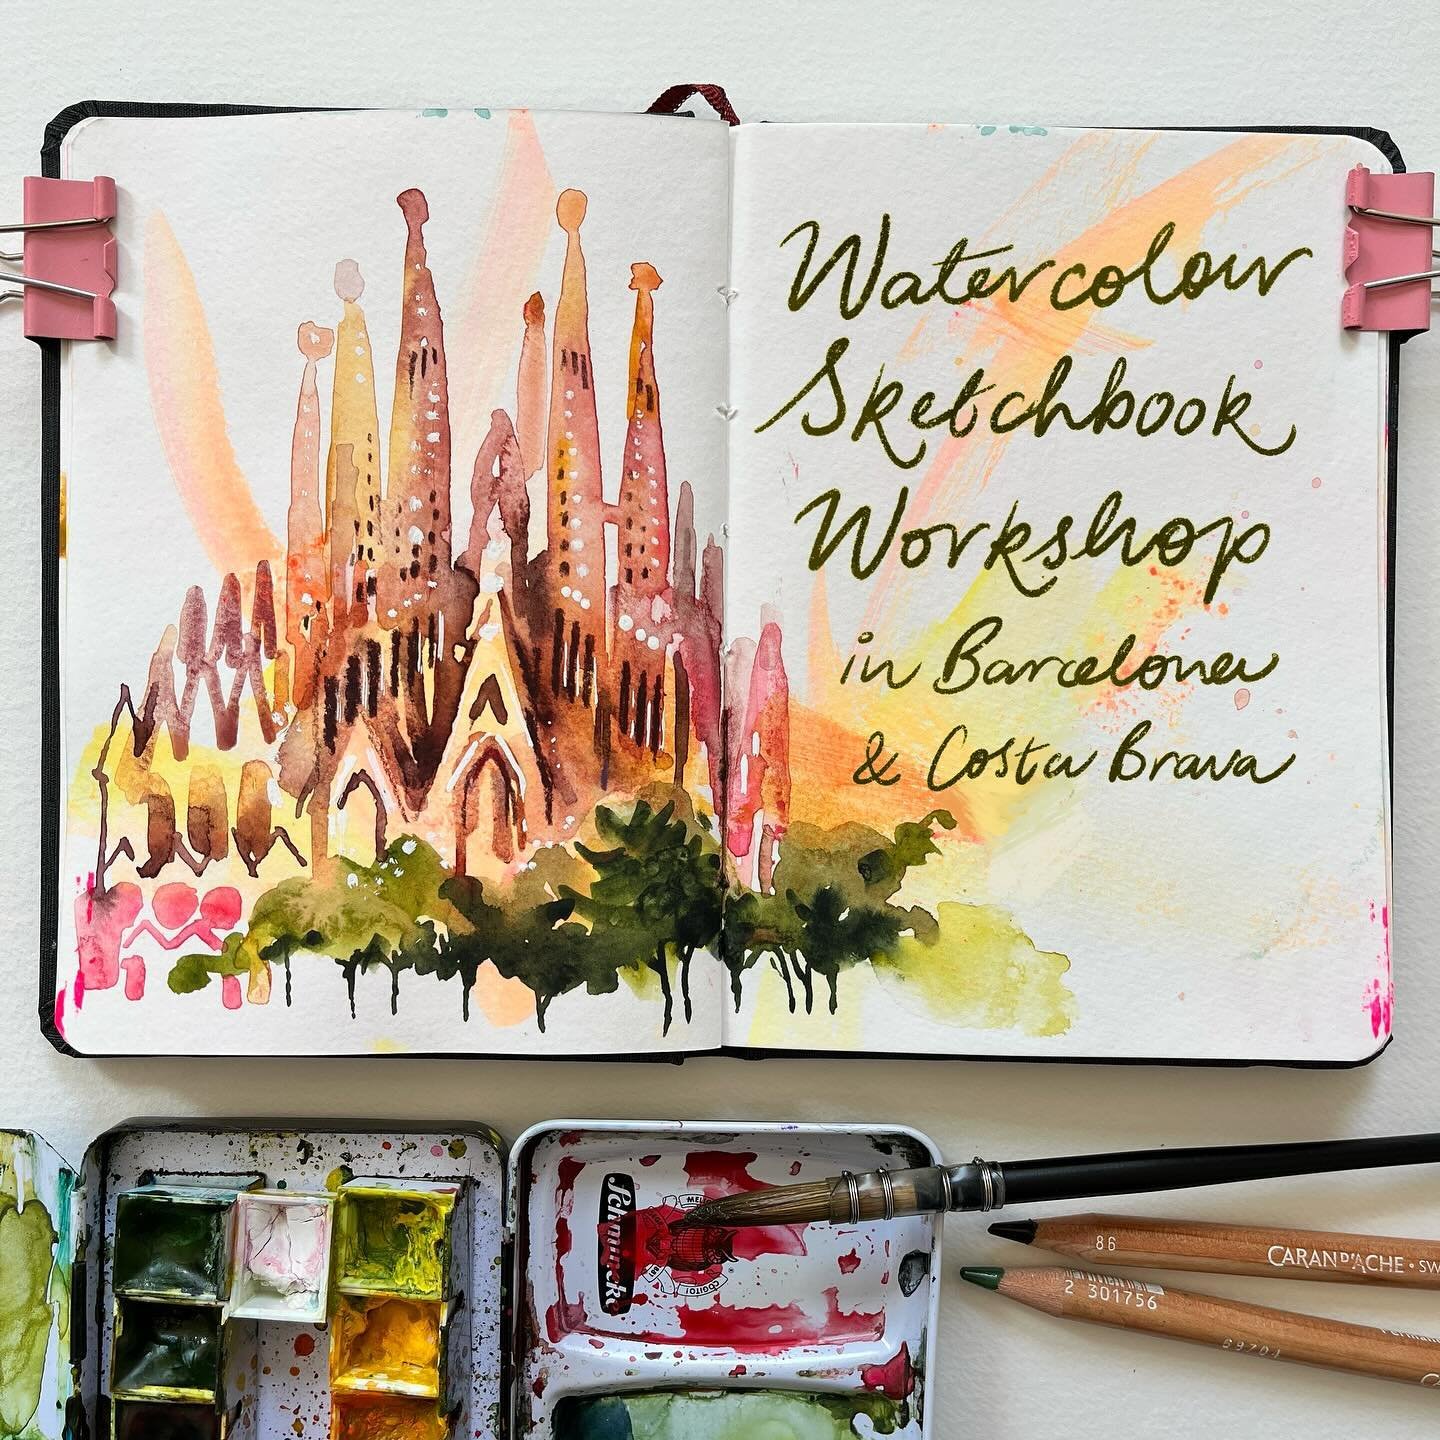 😀Exiting news: I&rsquo;m hosting the Watercolor Sketchbook Workshop in Spain in 2025 with @_thebluewalk 🇪🇸We&rsquo;ll start off in vibrant Barcelona, right by La Rambla, where art and history merge. There&rsquo;s trips into local markets, savoring